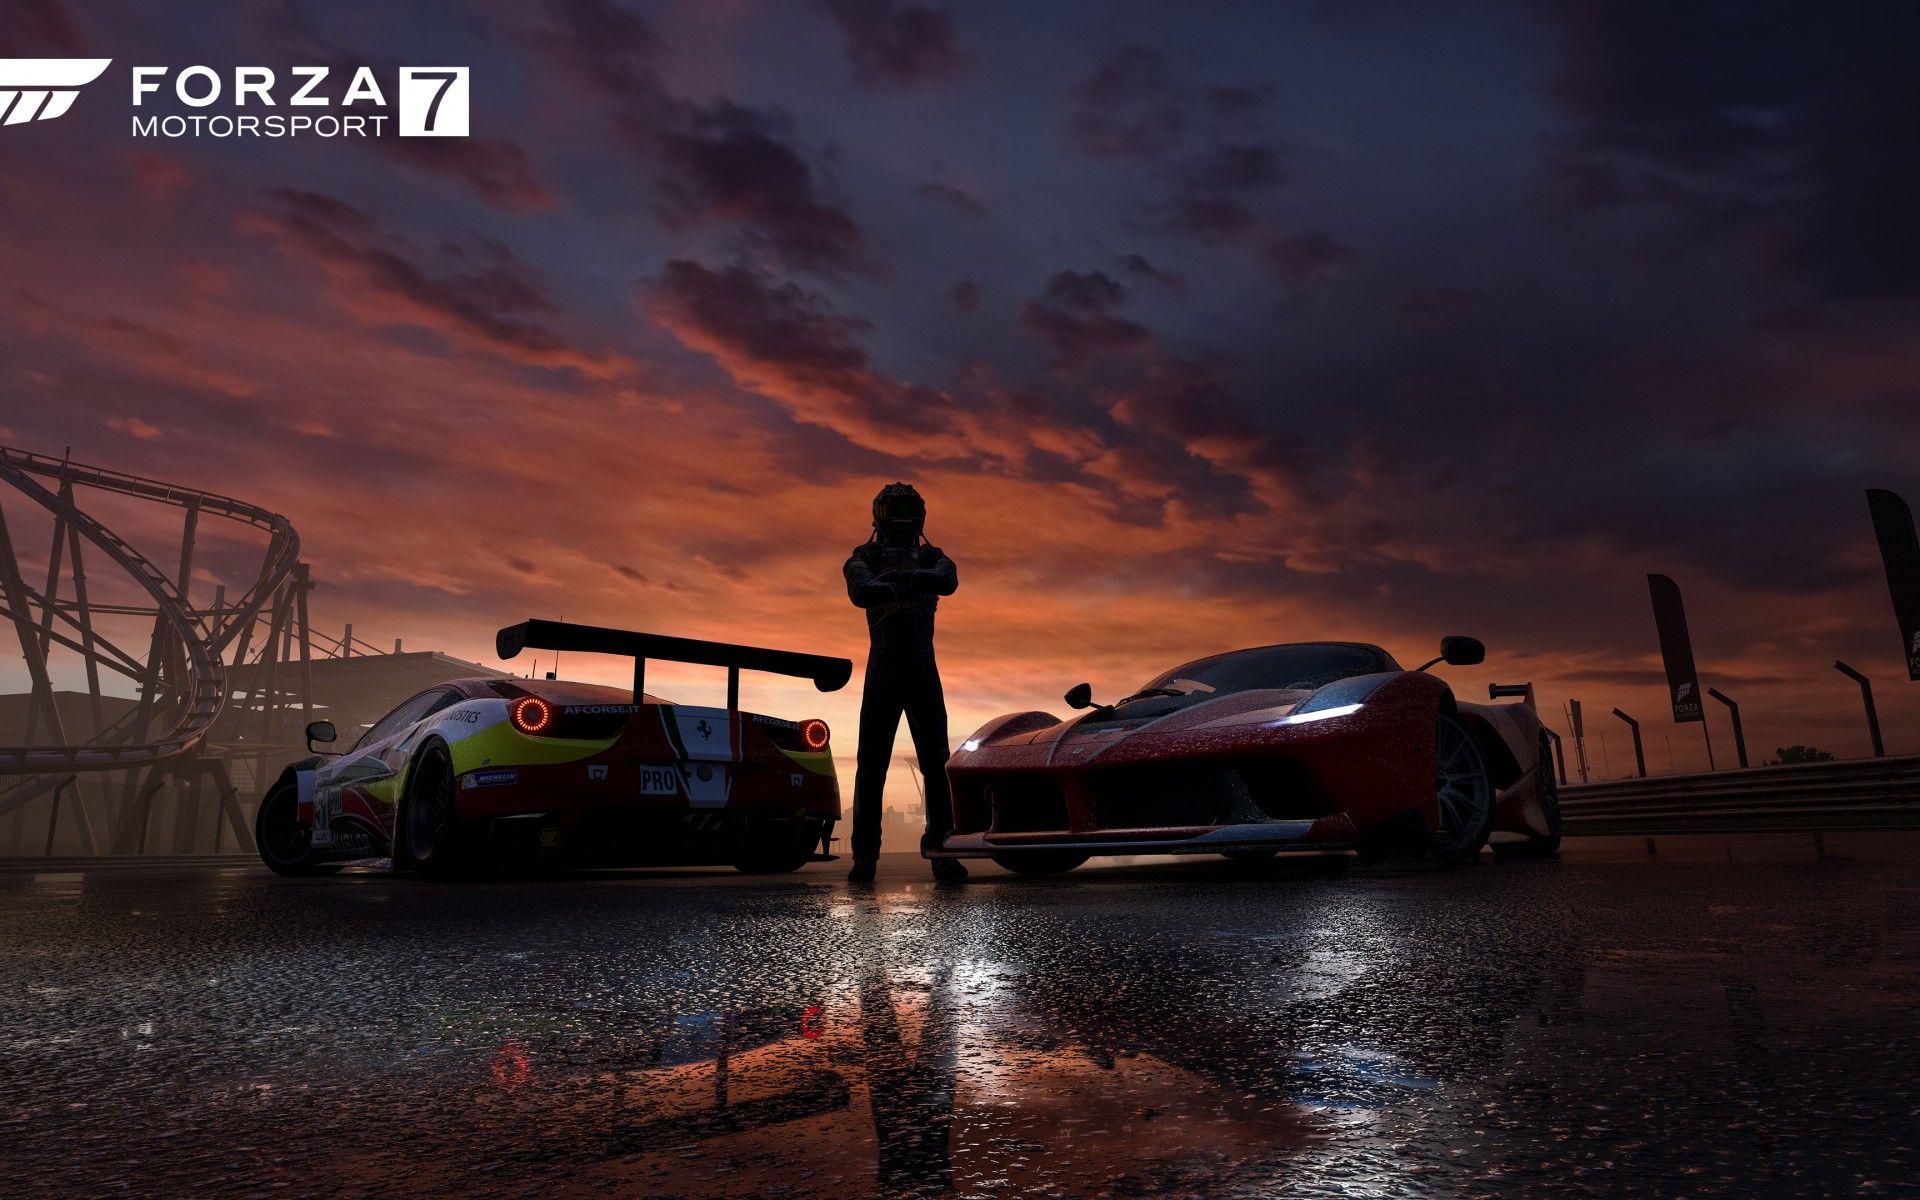 Wallpapers Forza Motorsport 7, 2017, Xbox One, PC, 4K, Games,